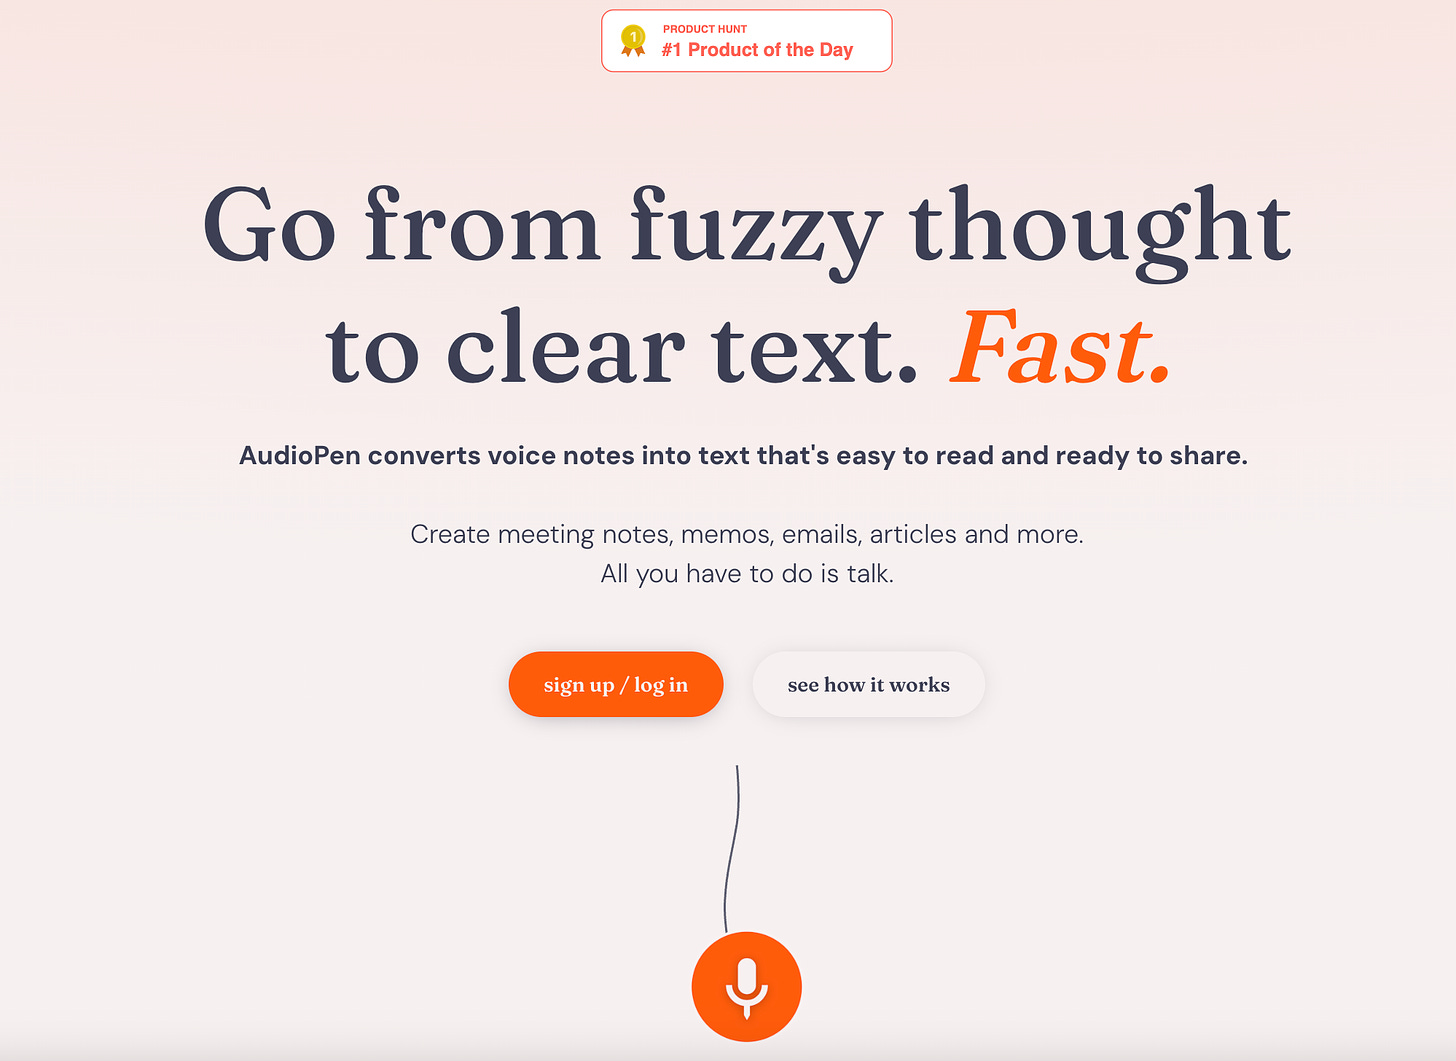 Audiopen: go from fuzzy thought to clear text.